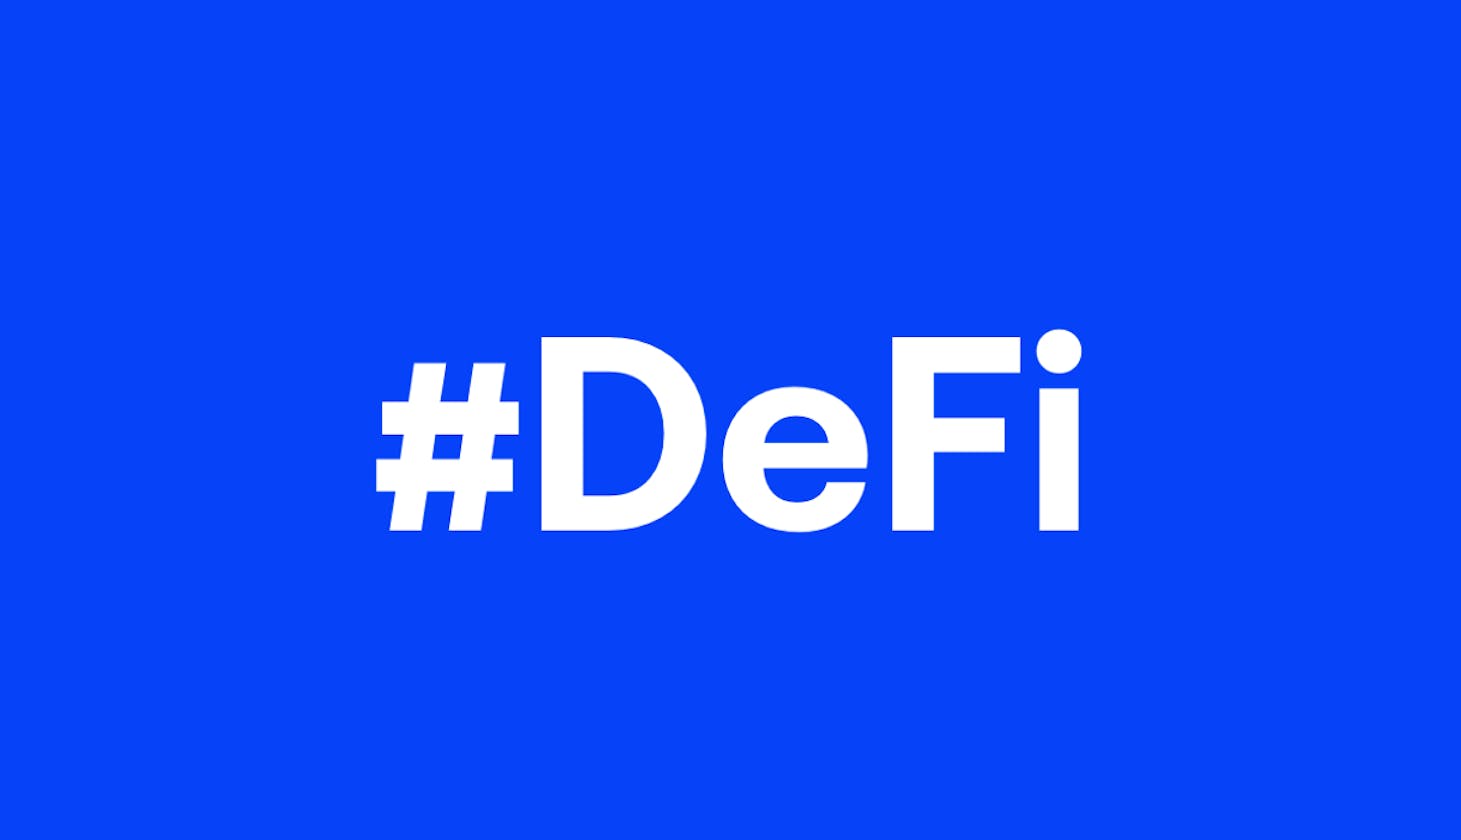 Getting started with DeFi and Stable Coins